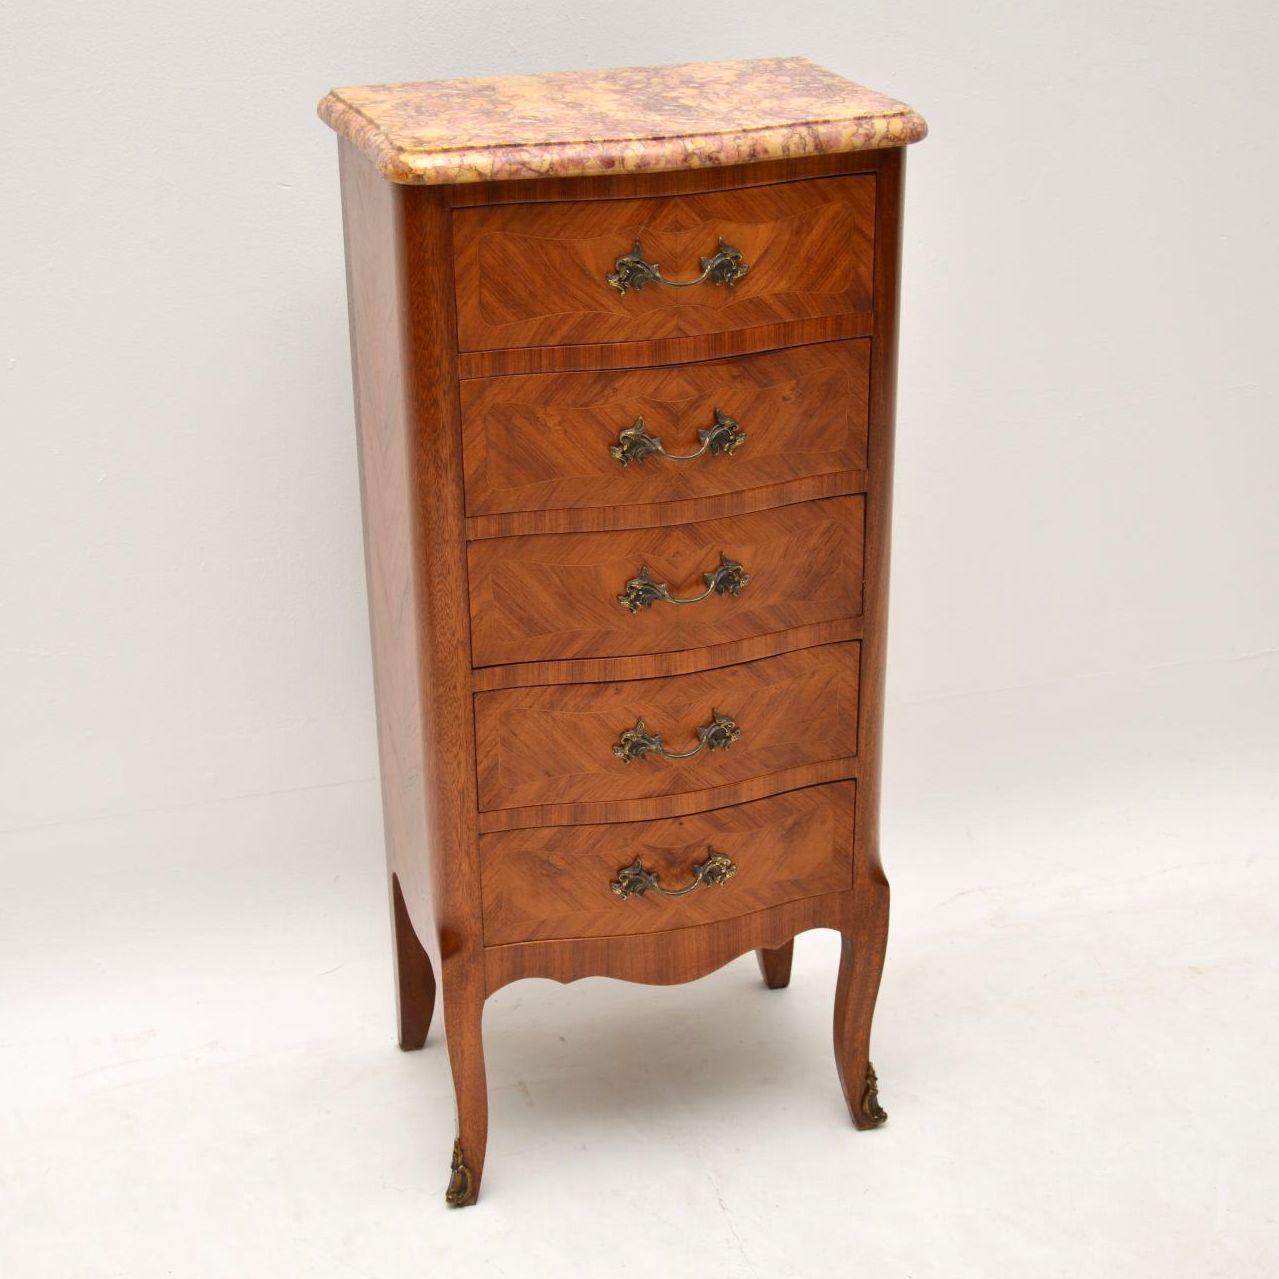 Small slim serpentine shaped antique French Kingwood marble top chest of drawers in excellent condition, which I would date to around the 1920s-1930s period. The drawers are all cross banded and inlaid, with original gilt handles and it has gilt